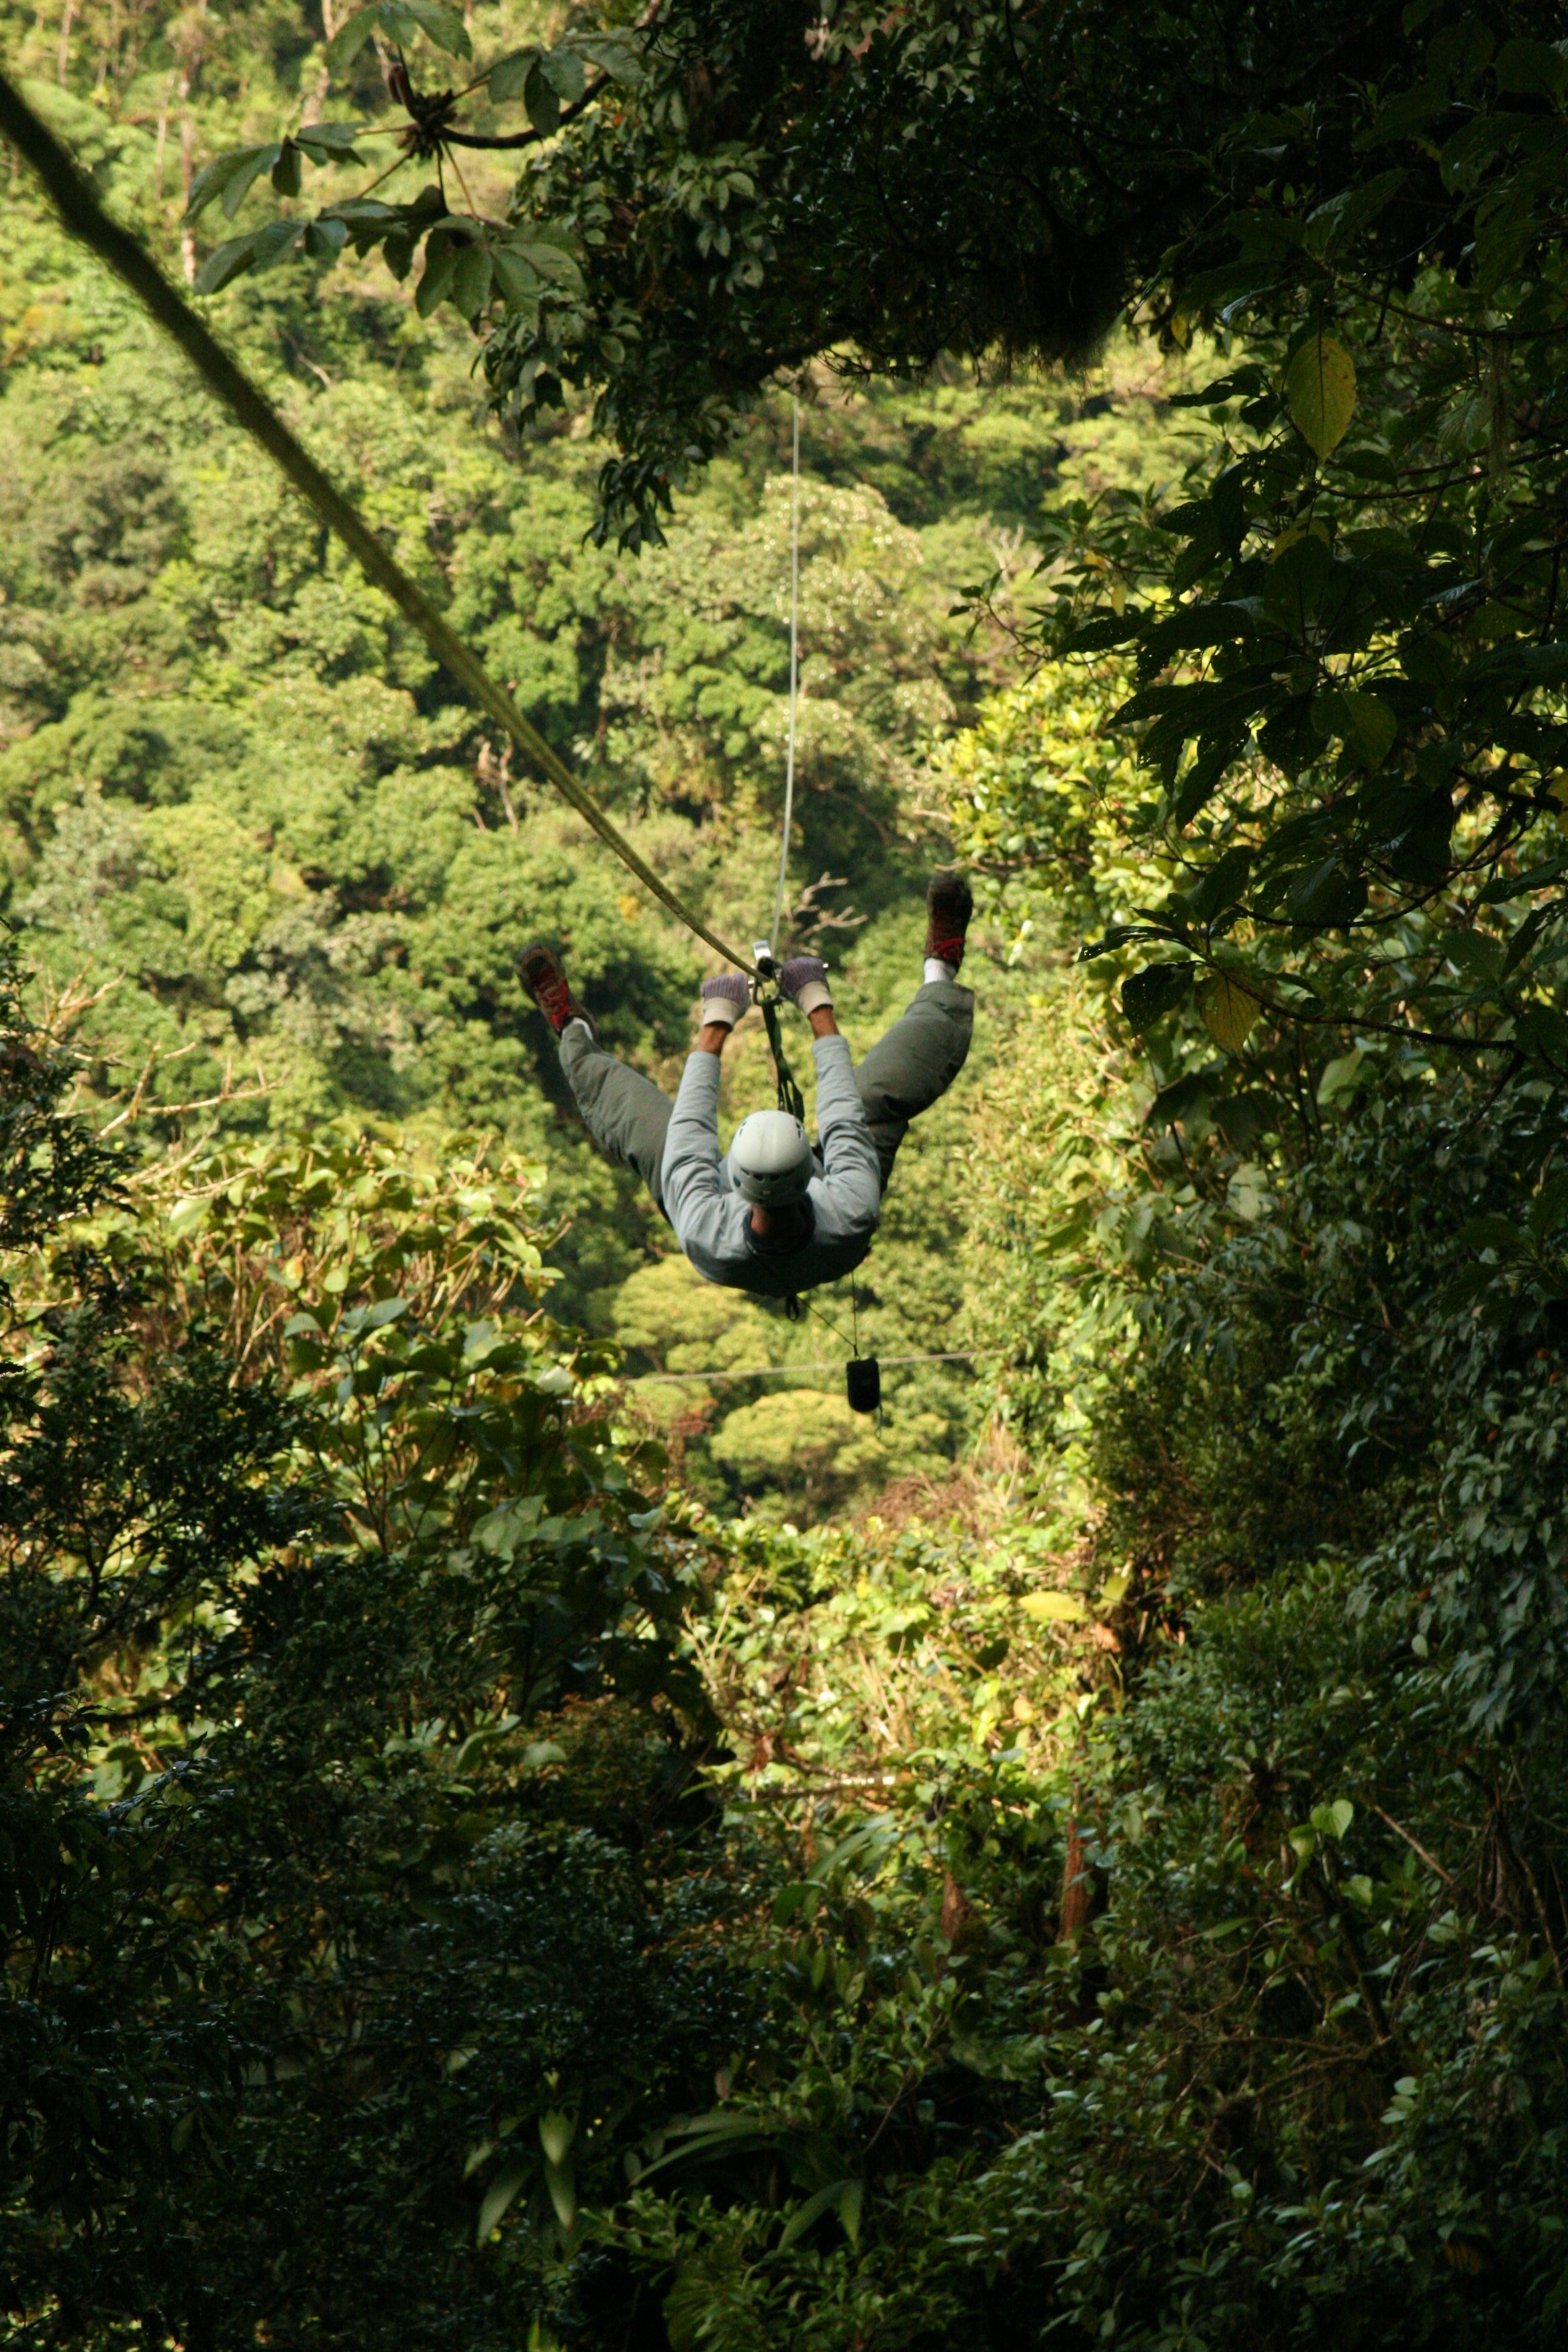 The zip-lines in Costa Rica where David experienced a “big-world, small-world” moment, as described in minute 113:25 of the interview.